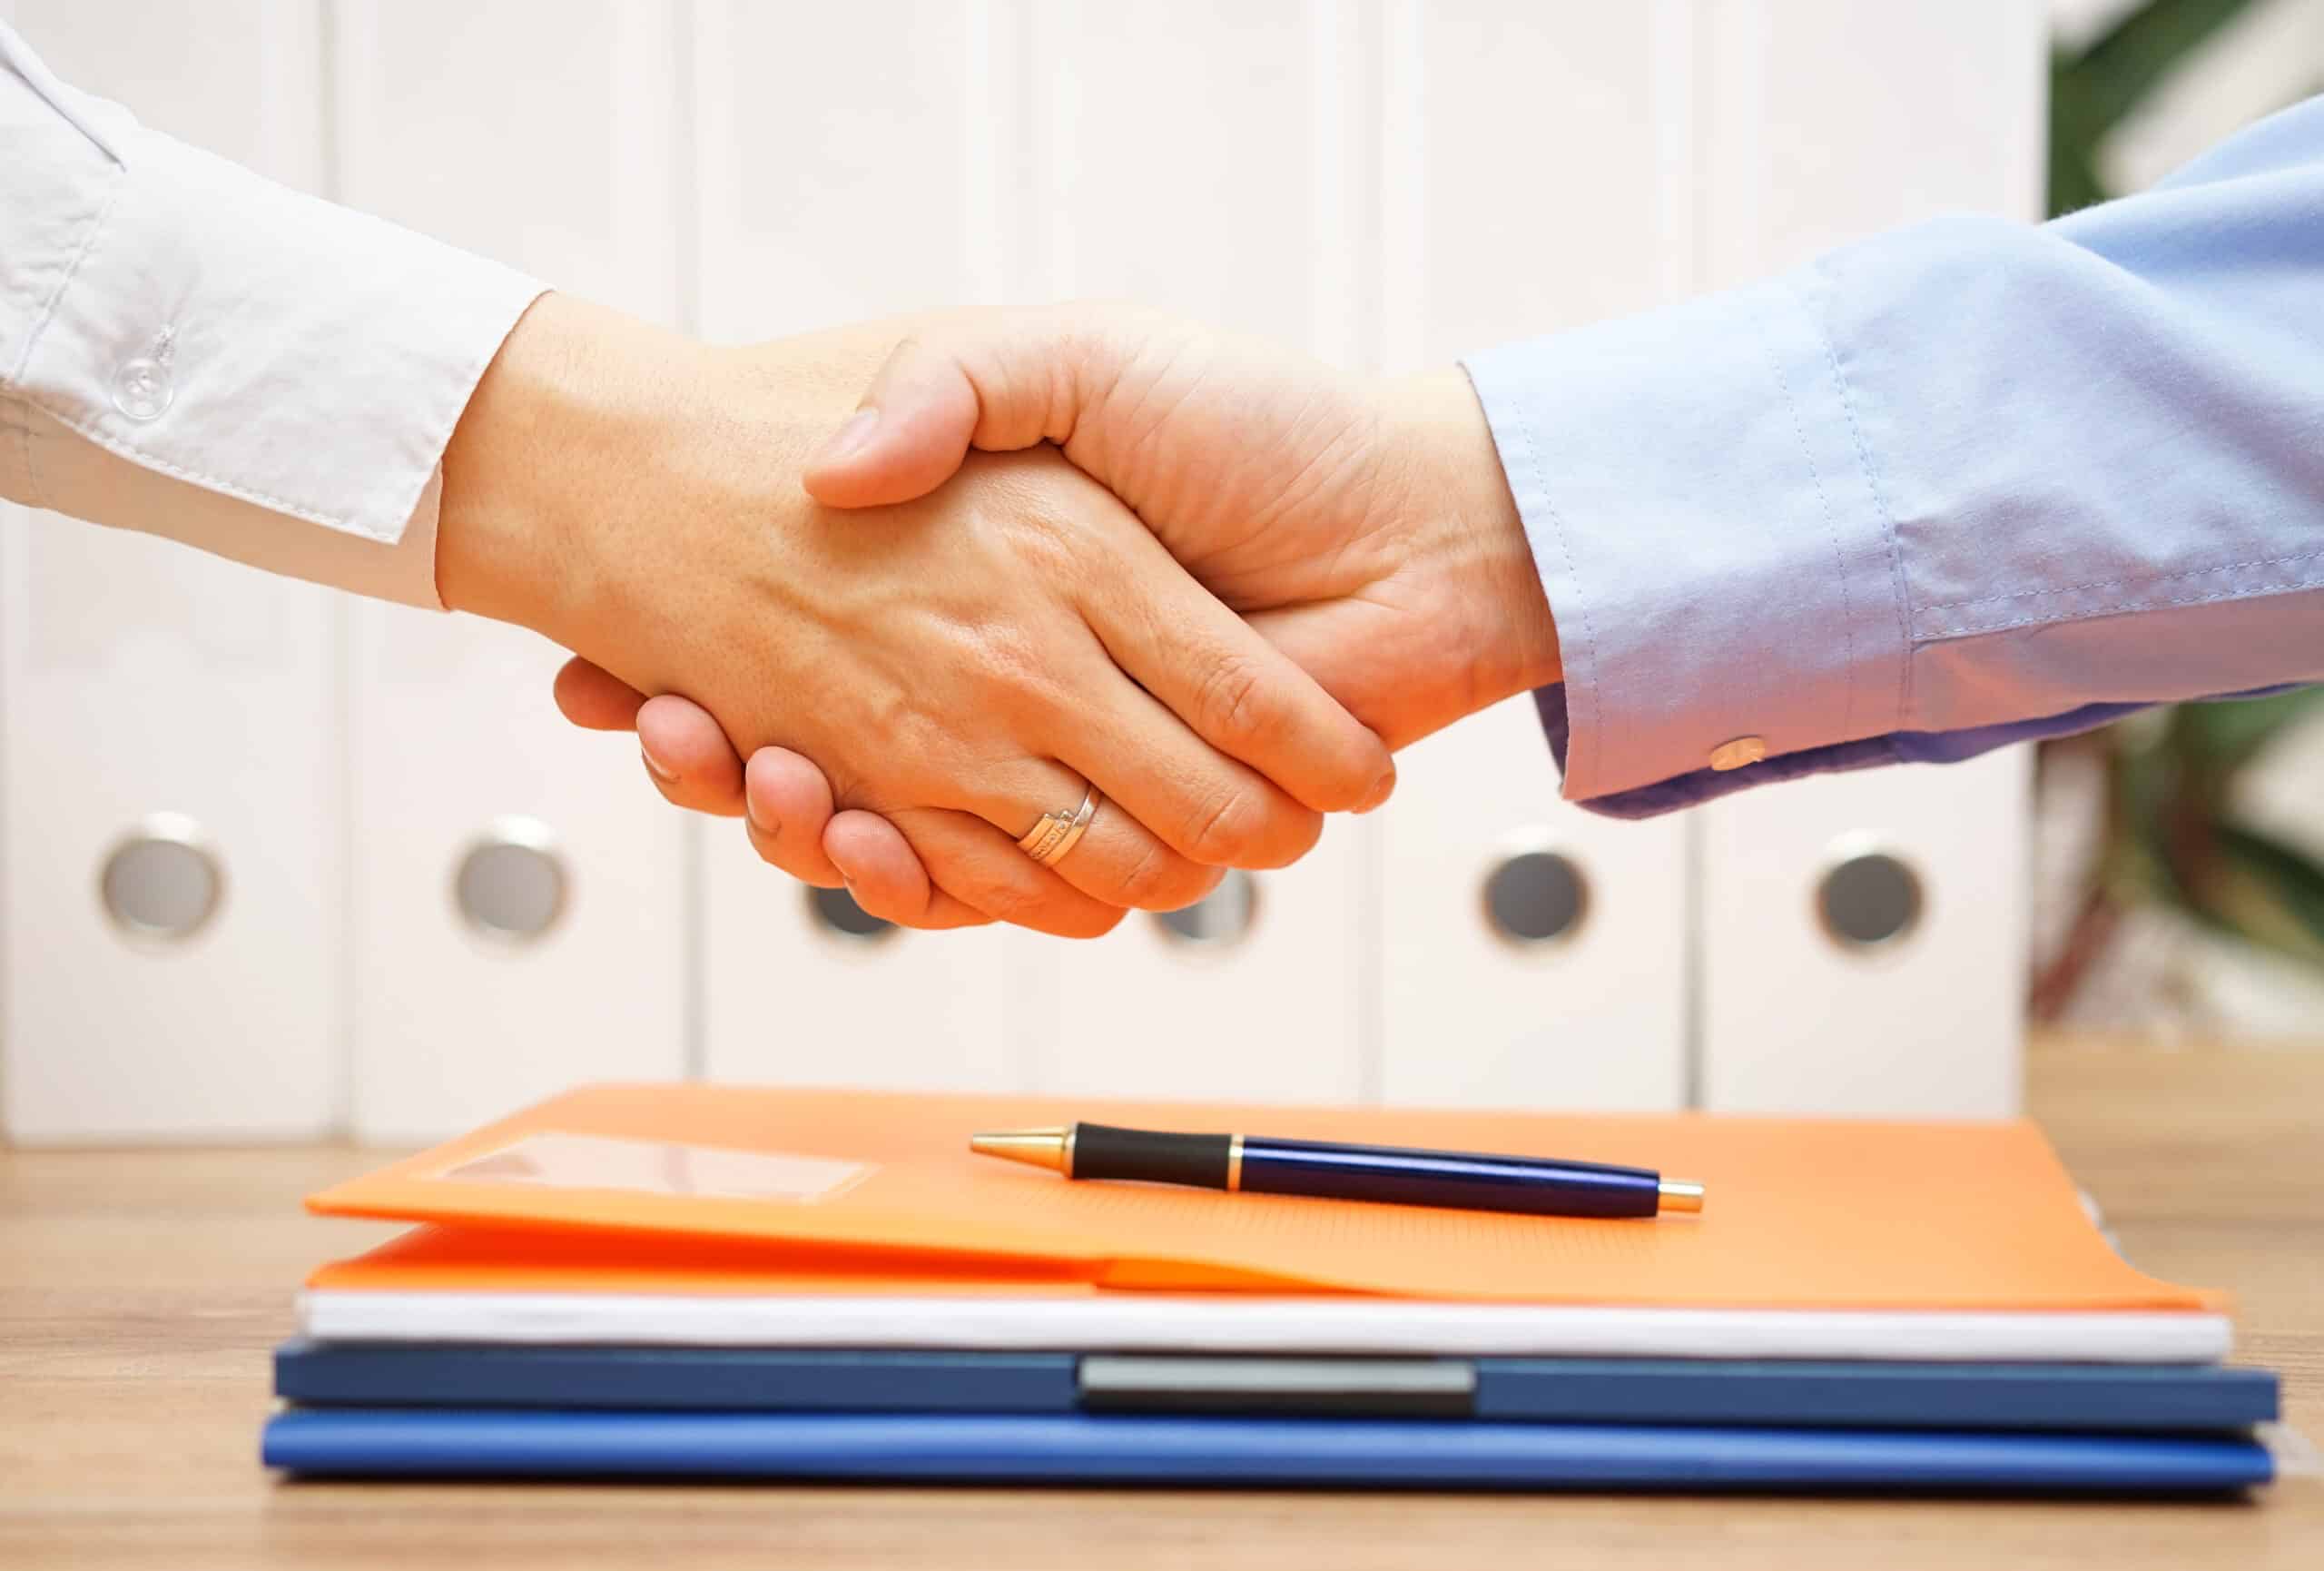 Two professionals shake hands over a stack of documents you should always provide your sunroom clients that's sitting on a table.